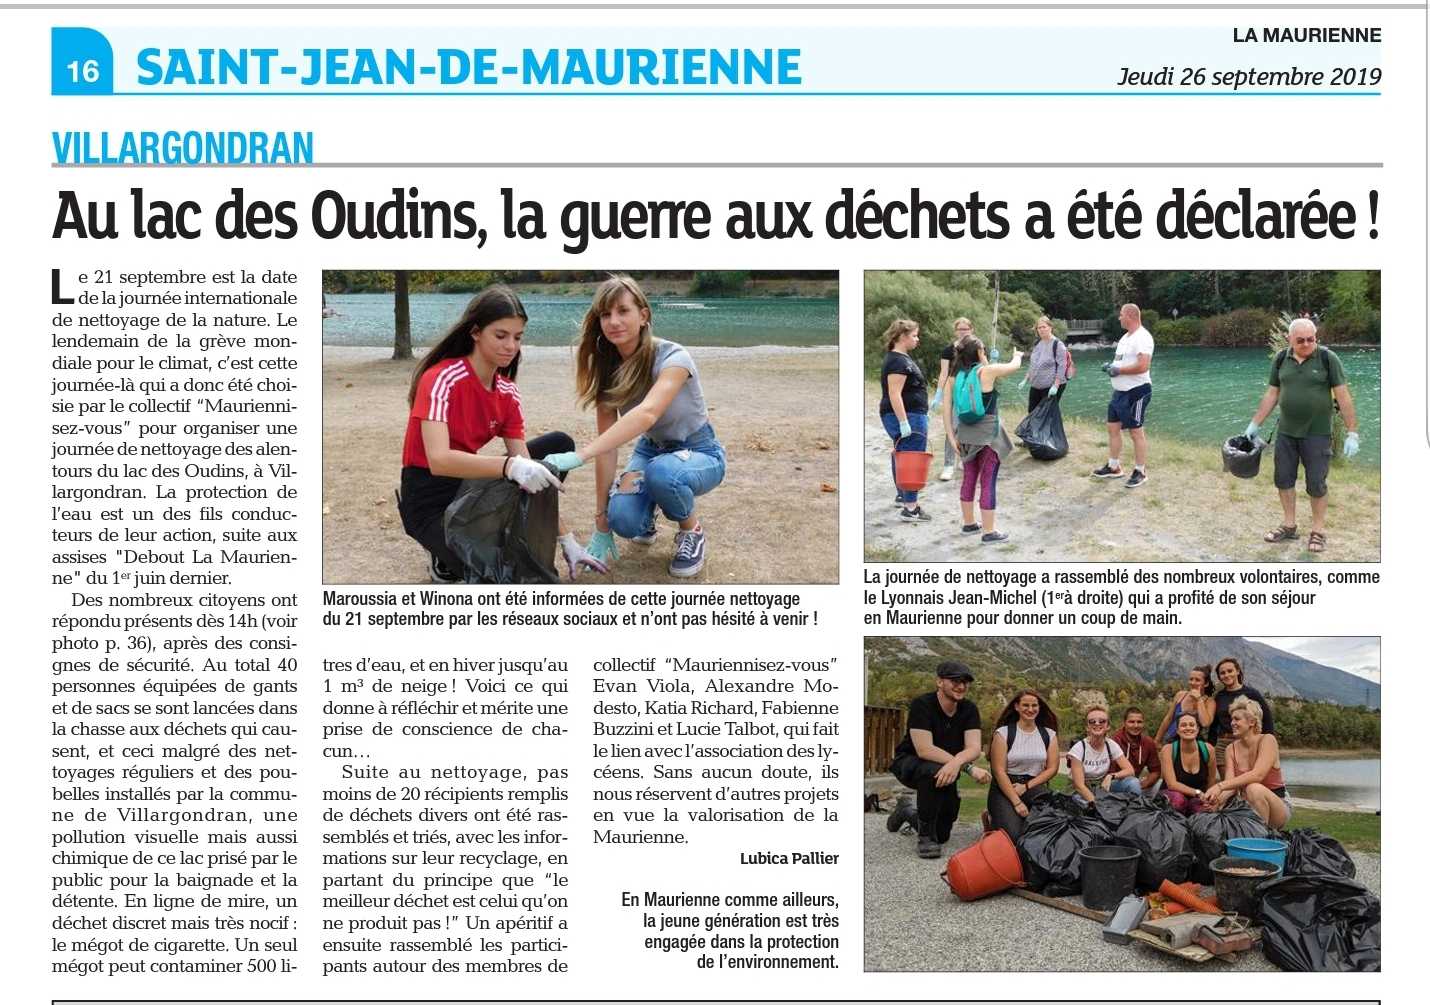 world clean up day maurienne mauriennisez vous